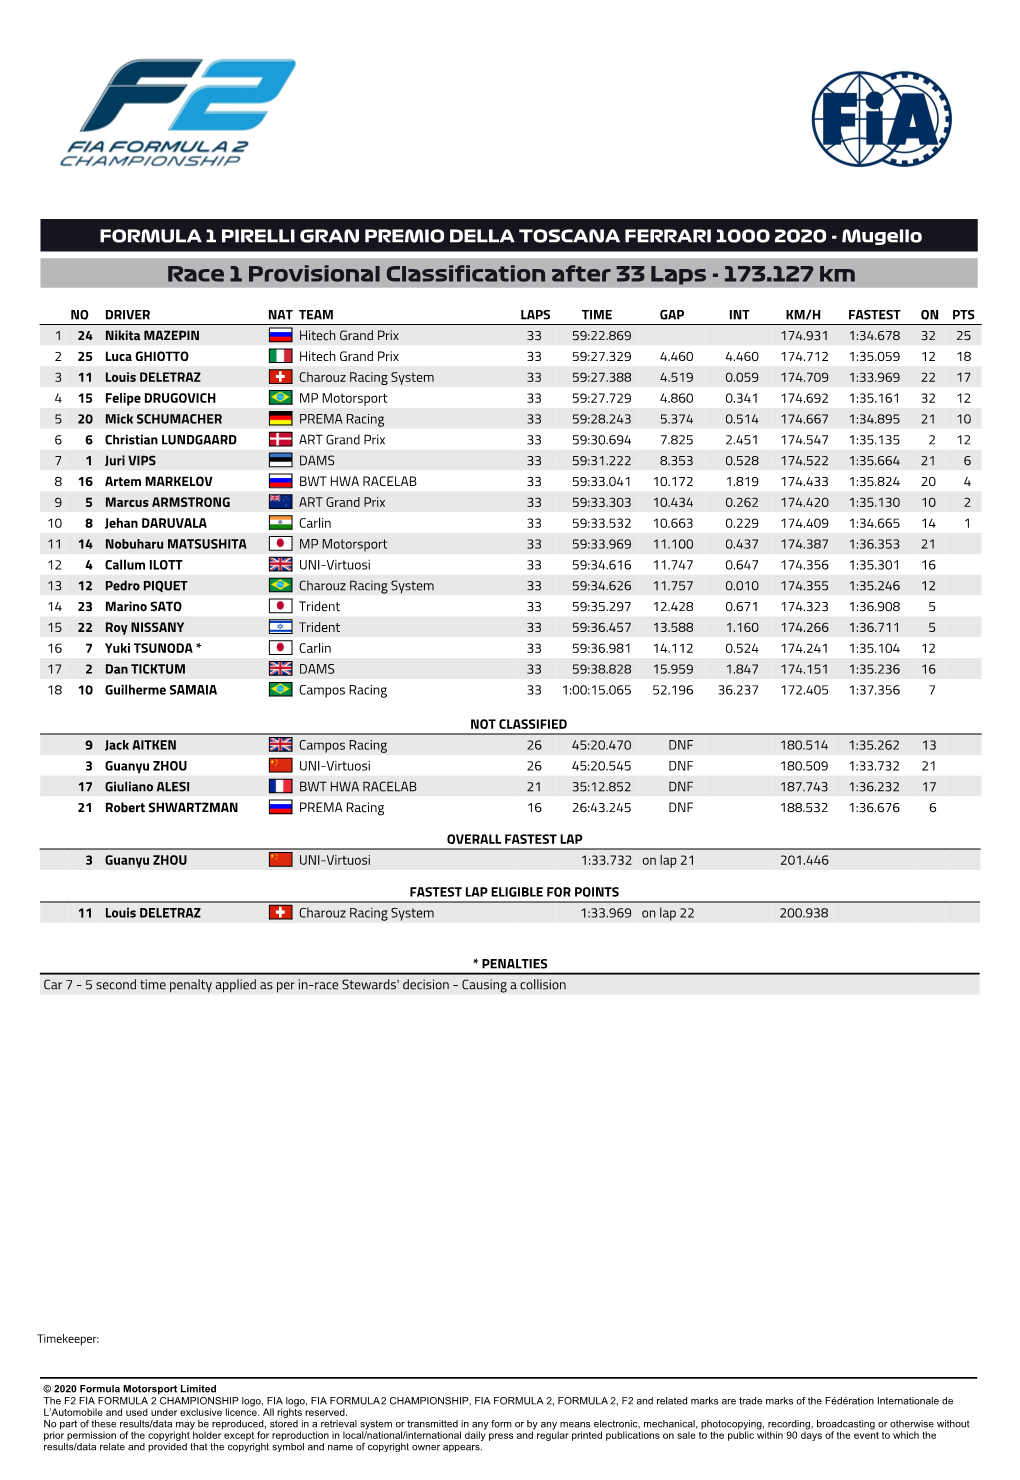 Race 1 Provisional Classification After 33 Laps - 173.127 Km